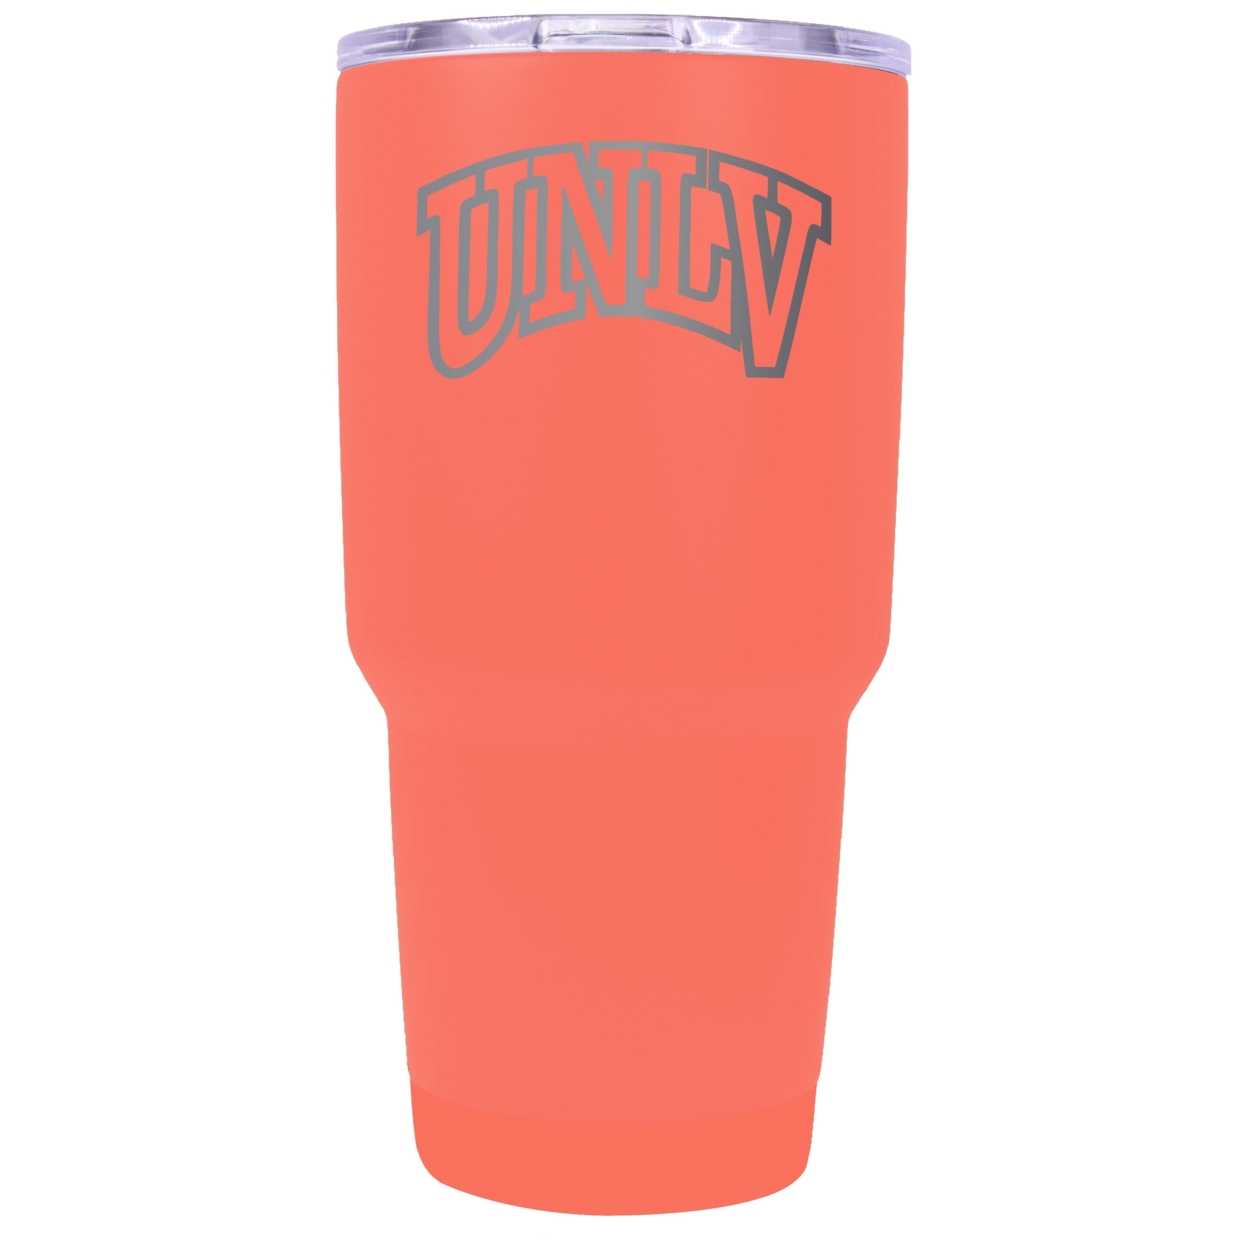 UNLV Rebels 24 Oz Laser Engraved Stainless Steel Insulated Tumbler - Choose Your Color. - Coral